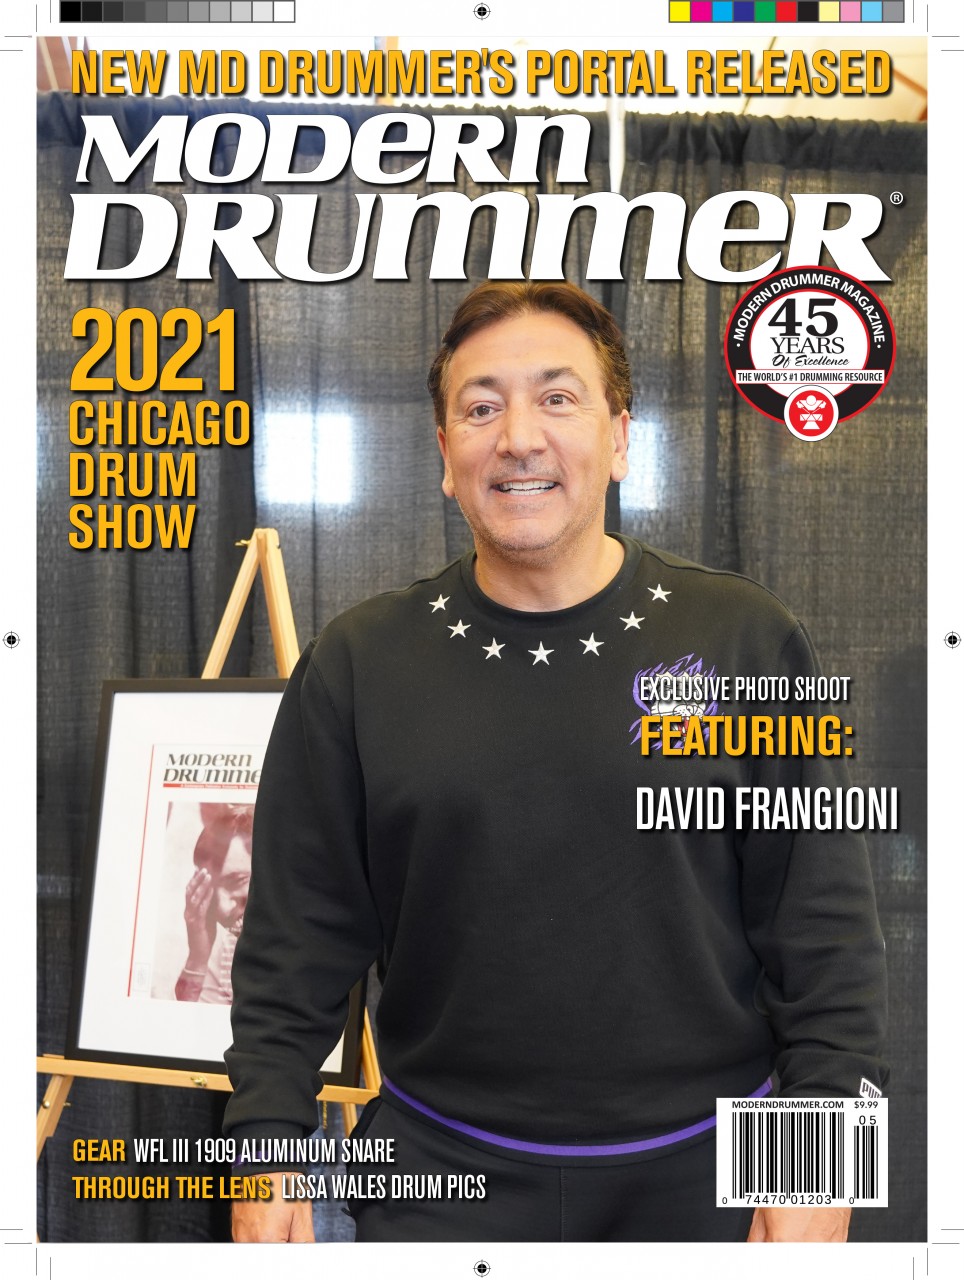 David-Frangioni---MD-2021-CHICAGO-DRUM-SHOW---PHOTO-BOOTH-COVER-Recovered